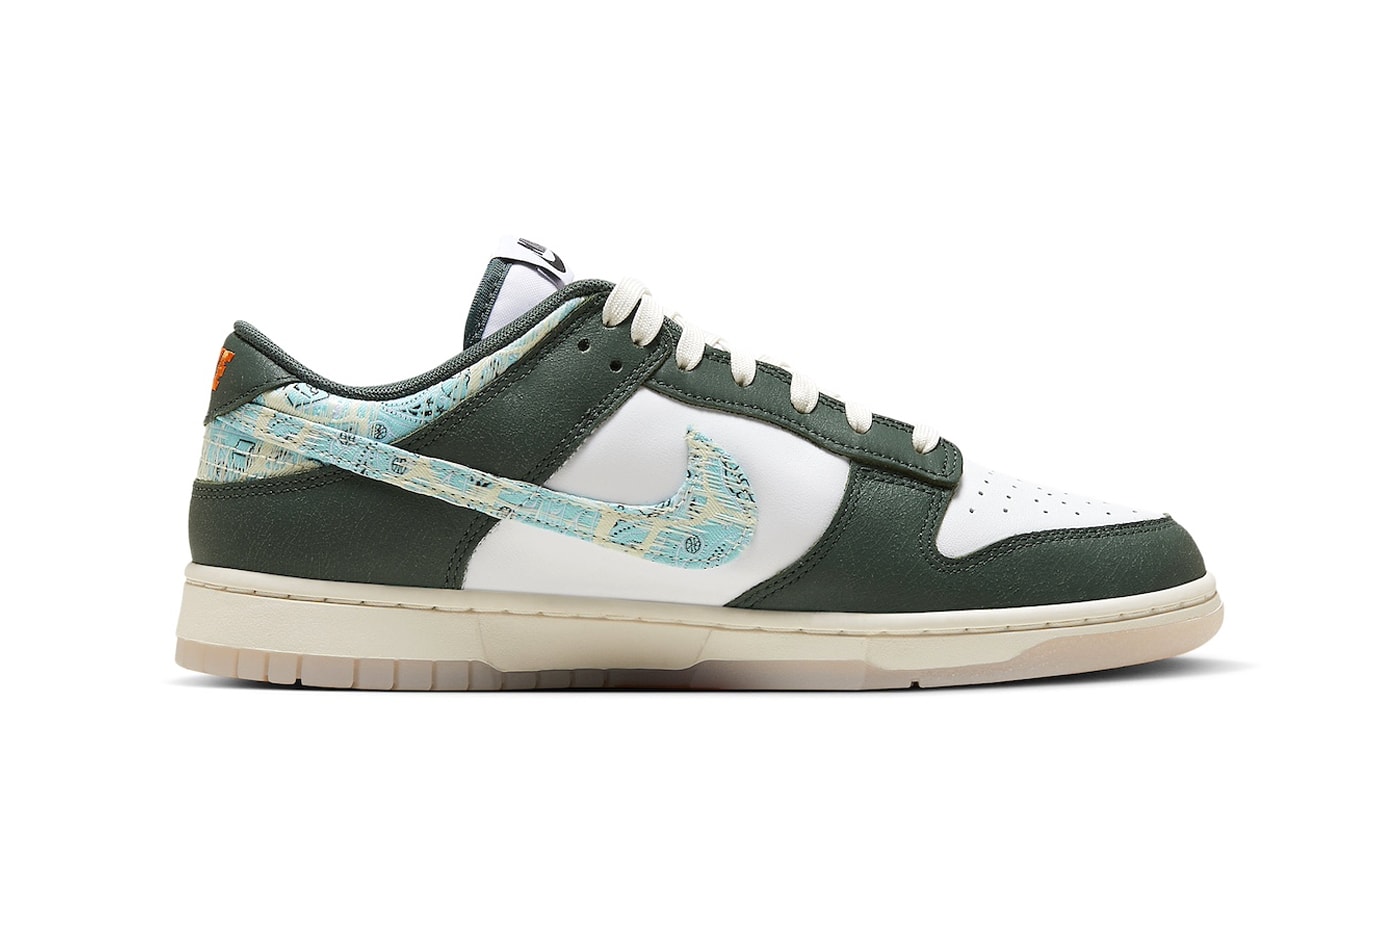 Official Look at the Nike Dunk Low "Hoops Fireball" HF5693-141 Sail/Blue-Gorge Green-White low tops swoosh shoes footwear